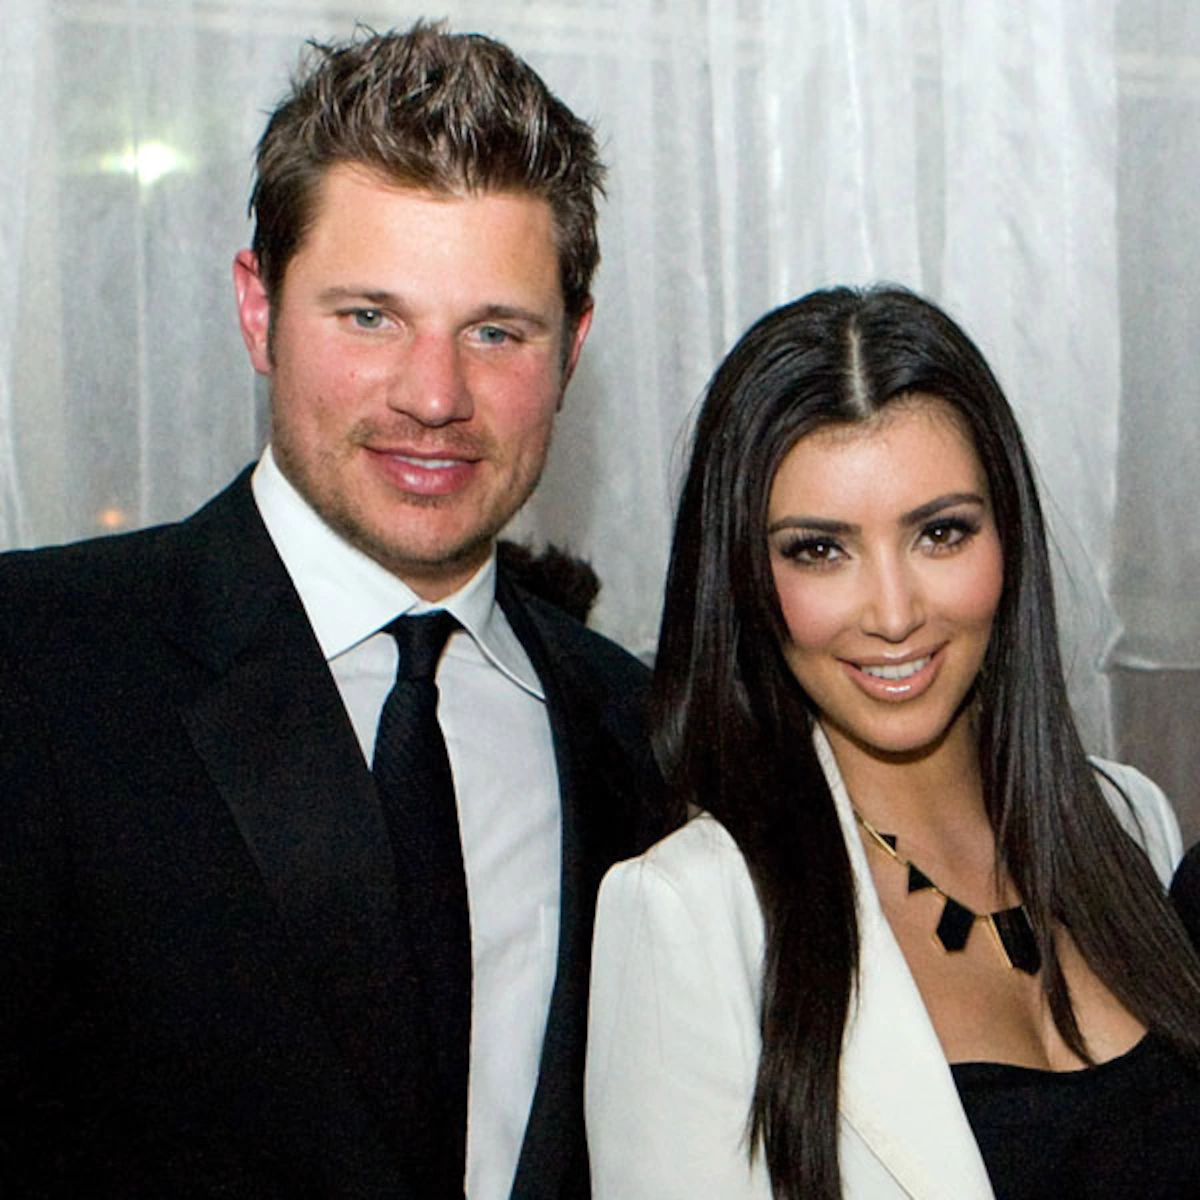 Kim and famous TV star Nick Lachey